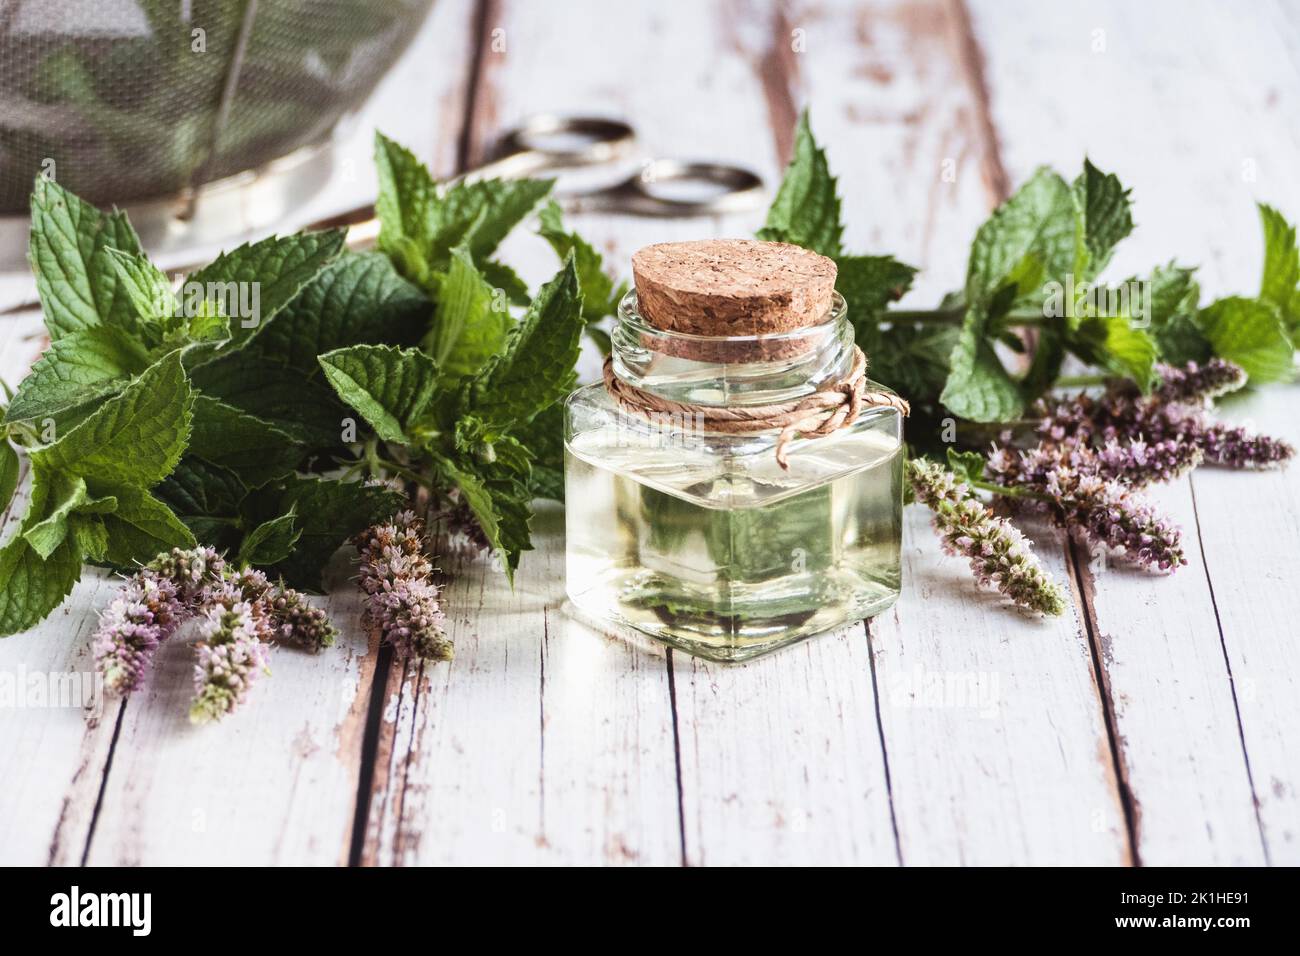 Natural mint oil in bottle, fresh mentha plants on old wooden table, essential mint oil, herbal medicine Stock Photo